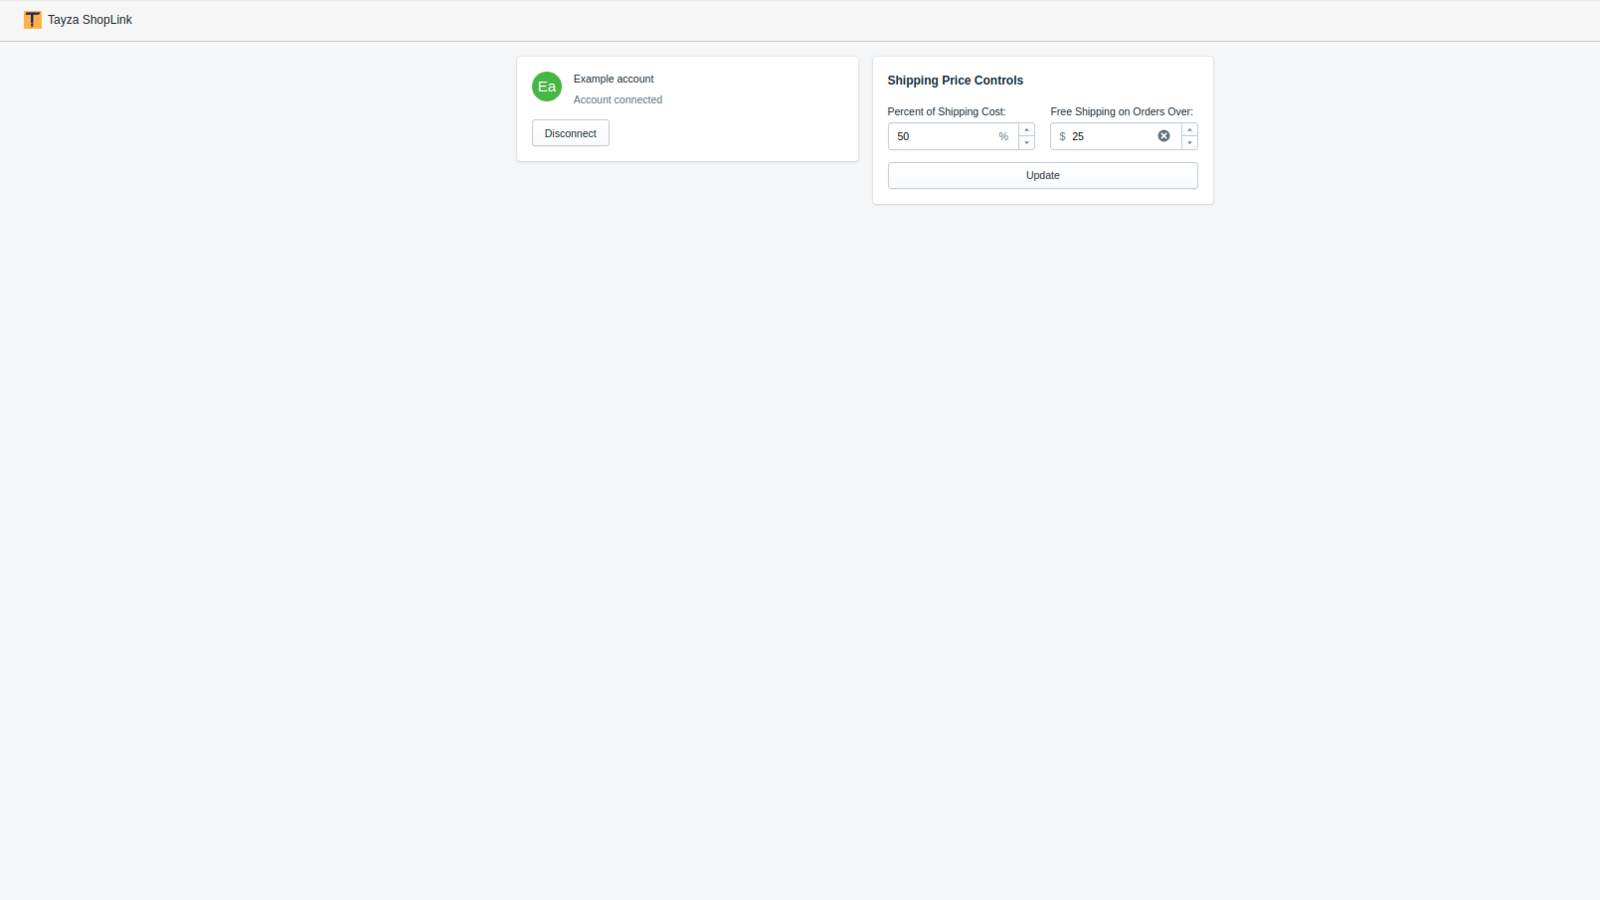 Dashboard with controls for account sync and delivery pricing